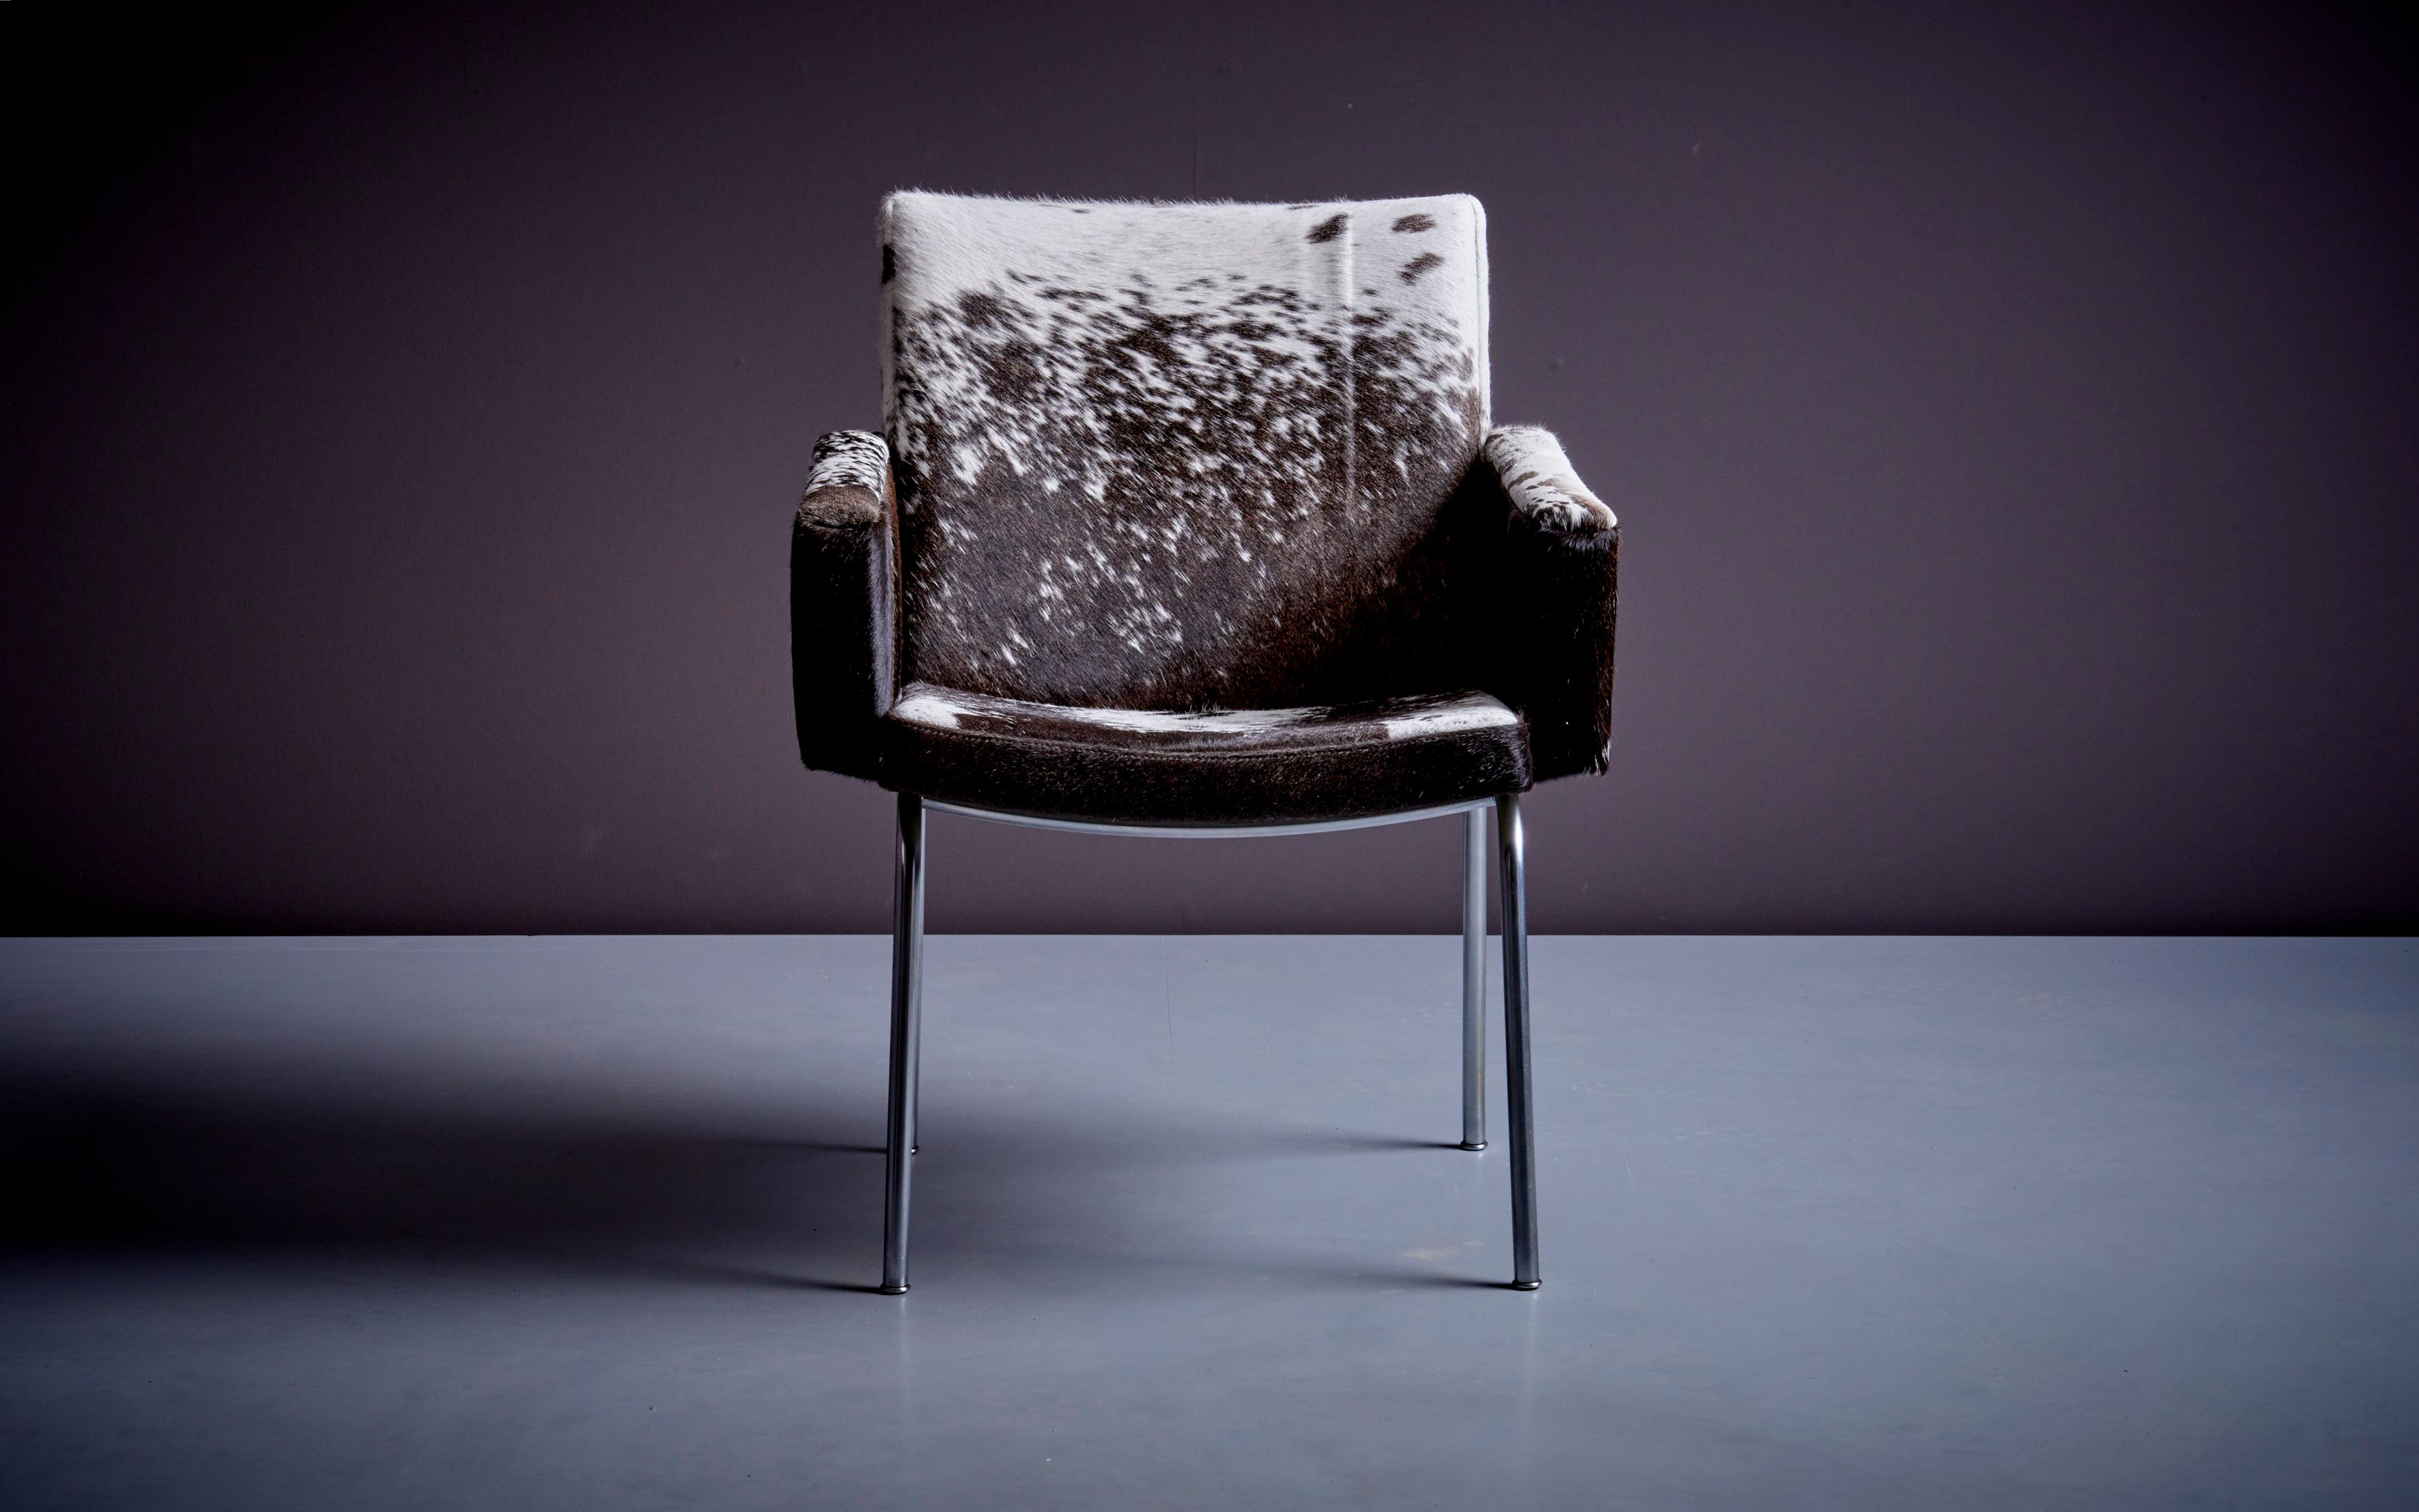 Newly Upholstered Hans Wegner AP48 armchair in Cowhide, Denmark 1960s. The AP48 Armchair is a classic furniture design by Hans Wegner, who designed the chair in 1951 for the manufacturer A.P. Stolen. 

The AP48 Armchair is a Mid-century modern